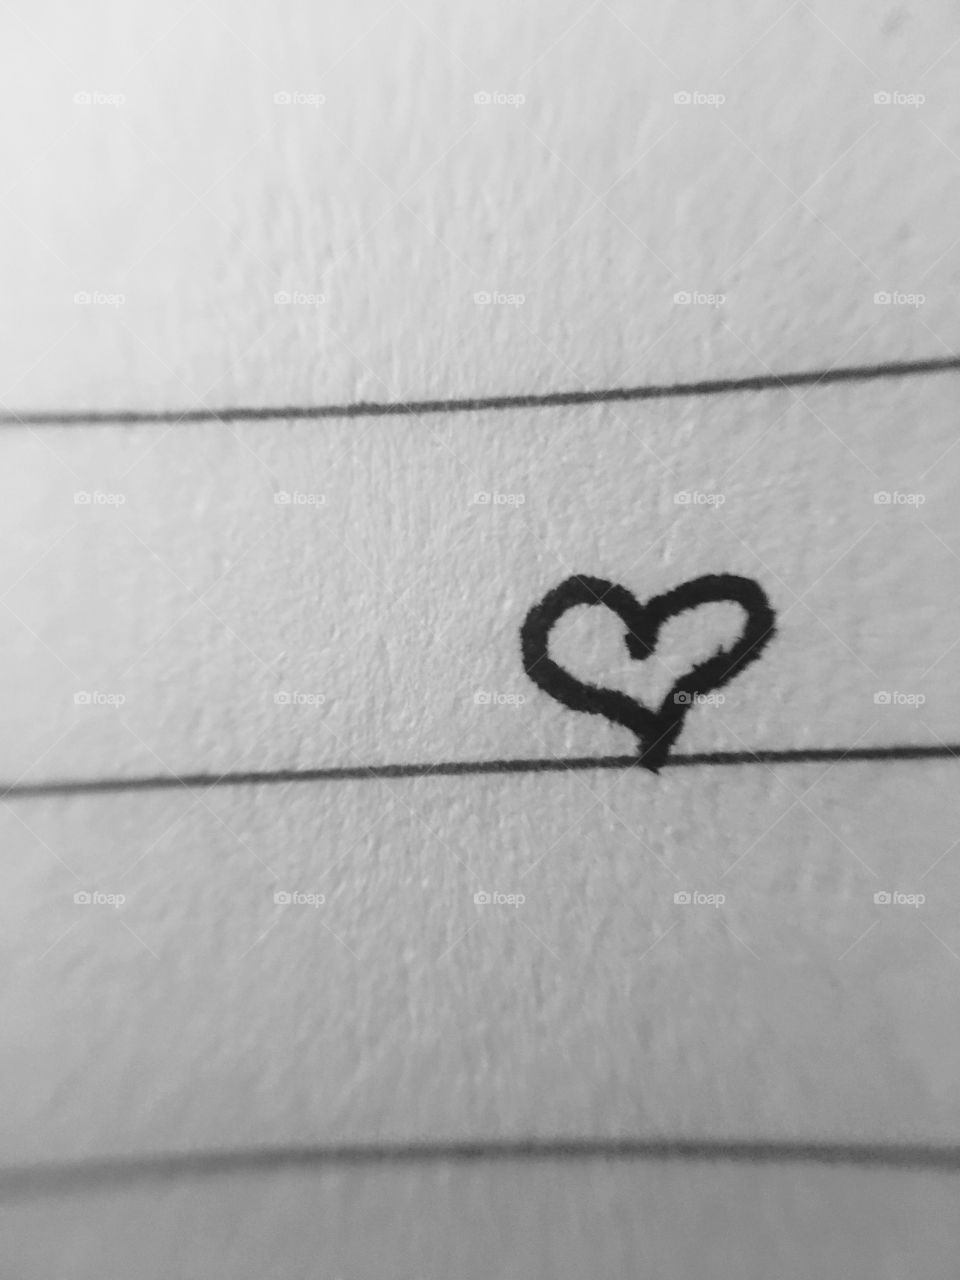 Heart drawn on paper. Micro-lens. 